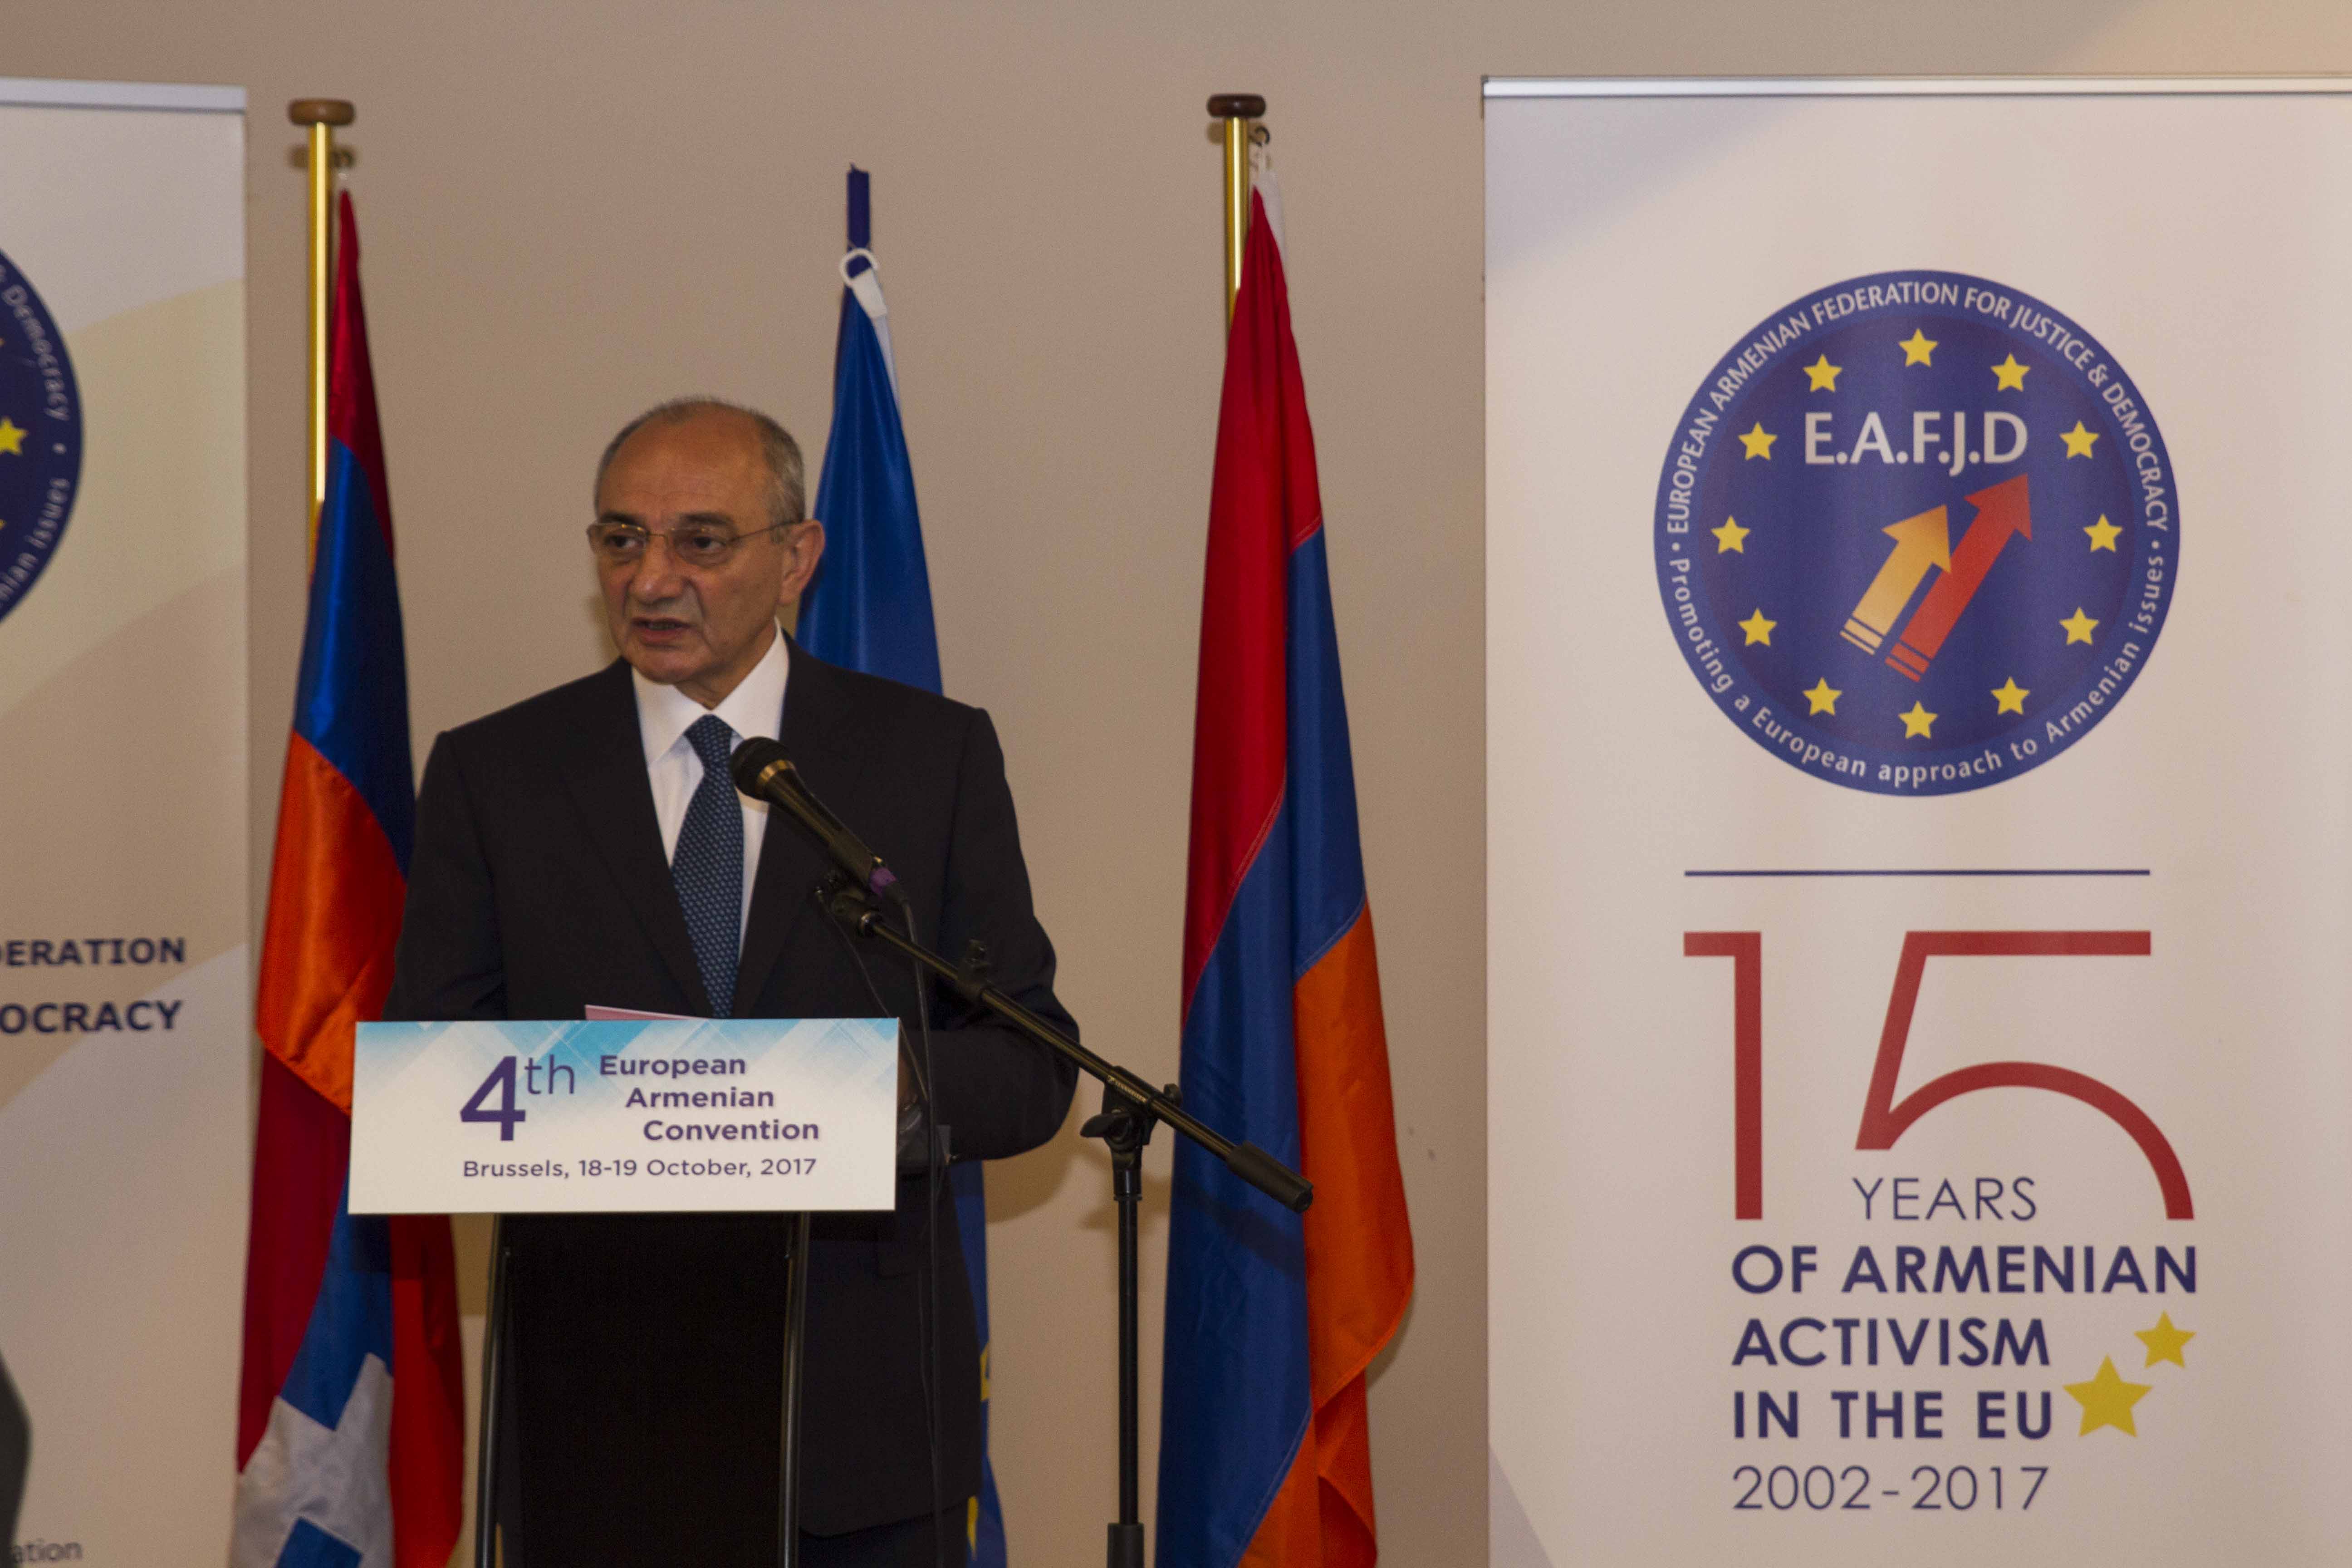 Bako Sahakyan expressed gratitude to all those who constantly support Artsakh